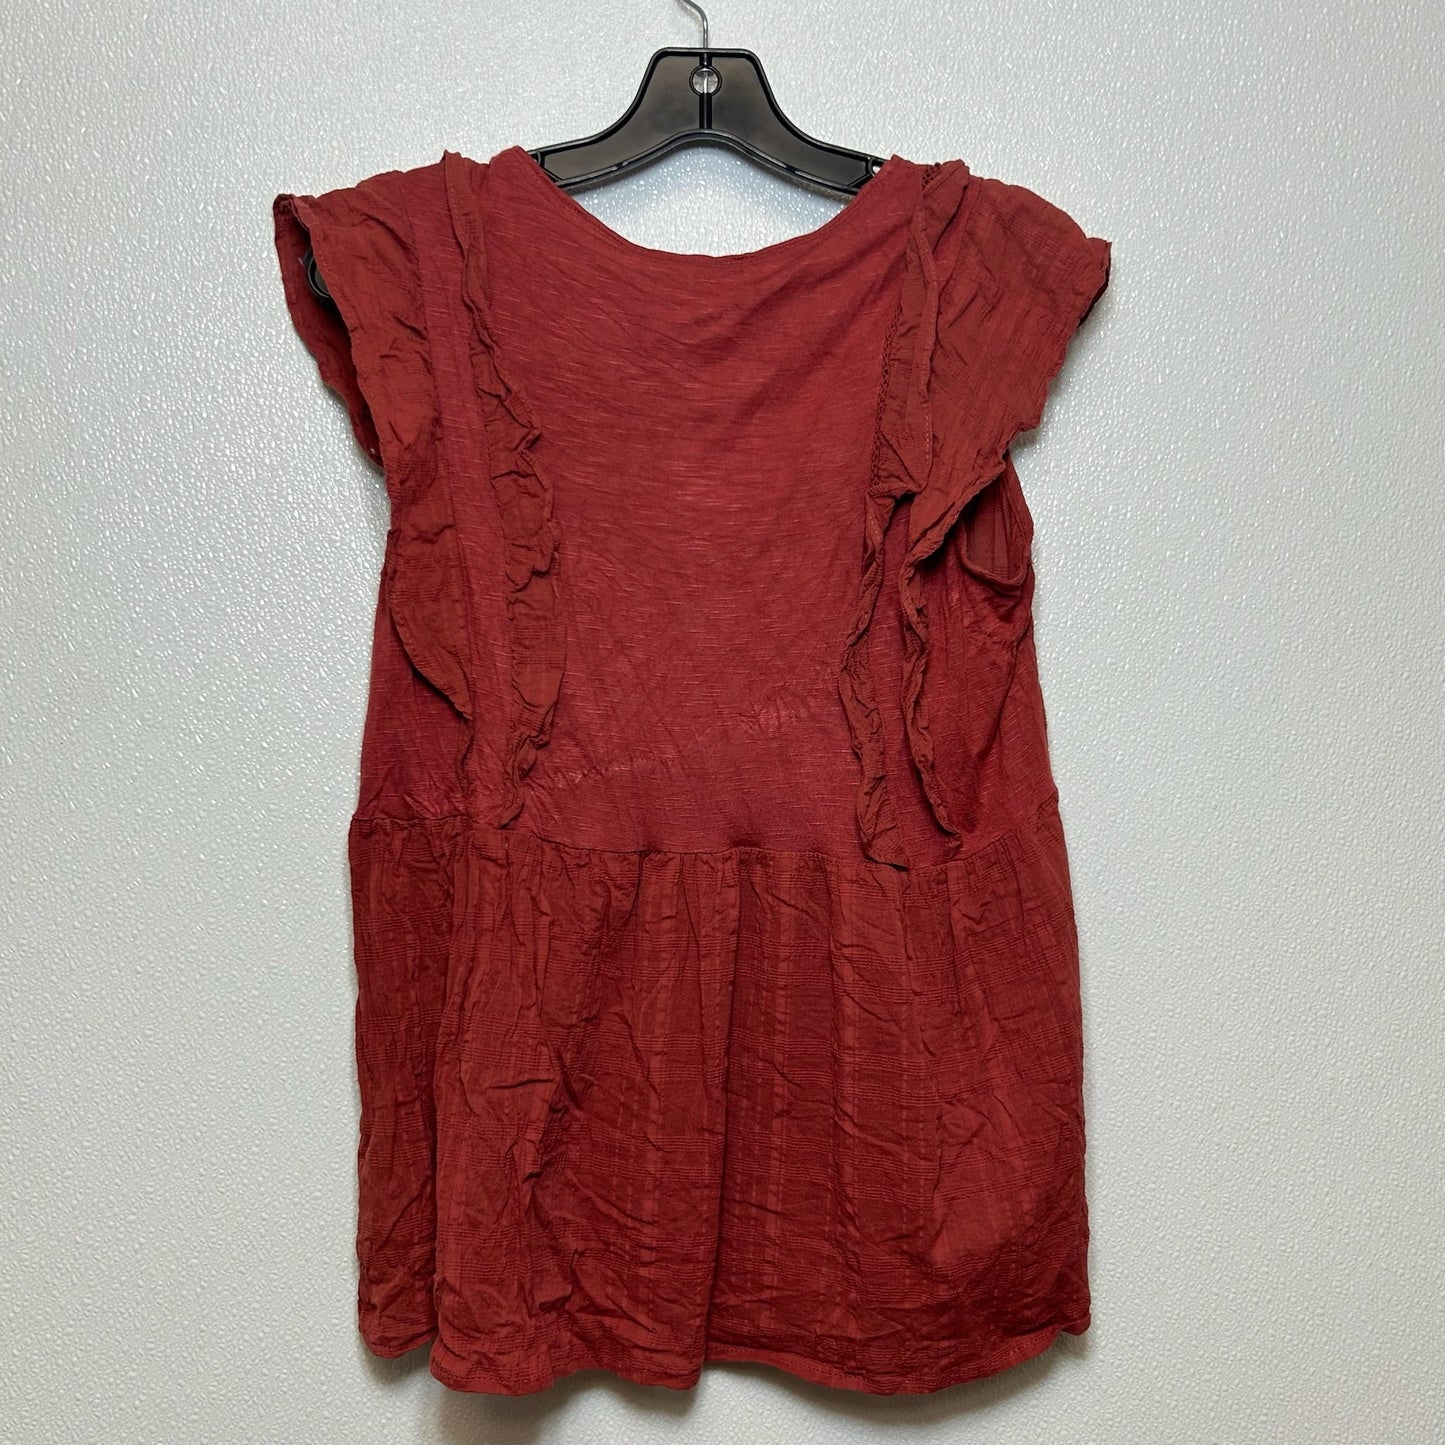 Rust Top Short Sleeve Knox Rose, Size M